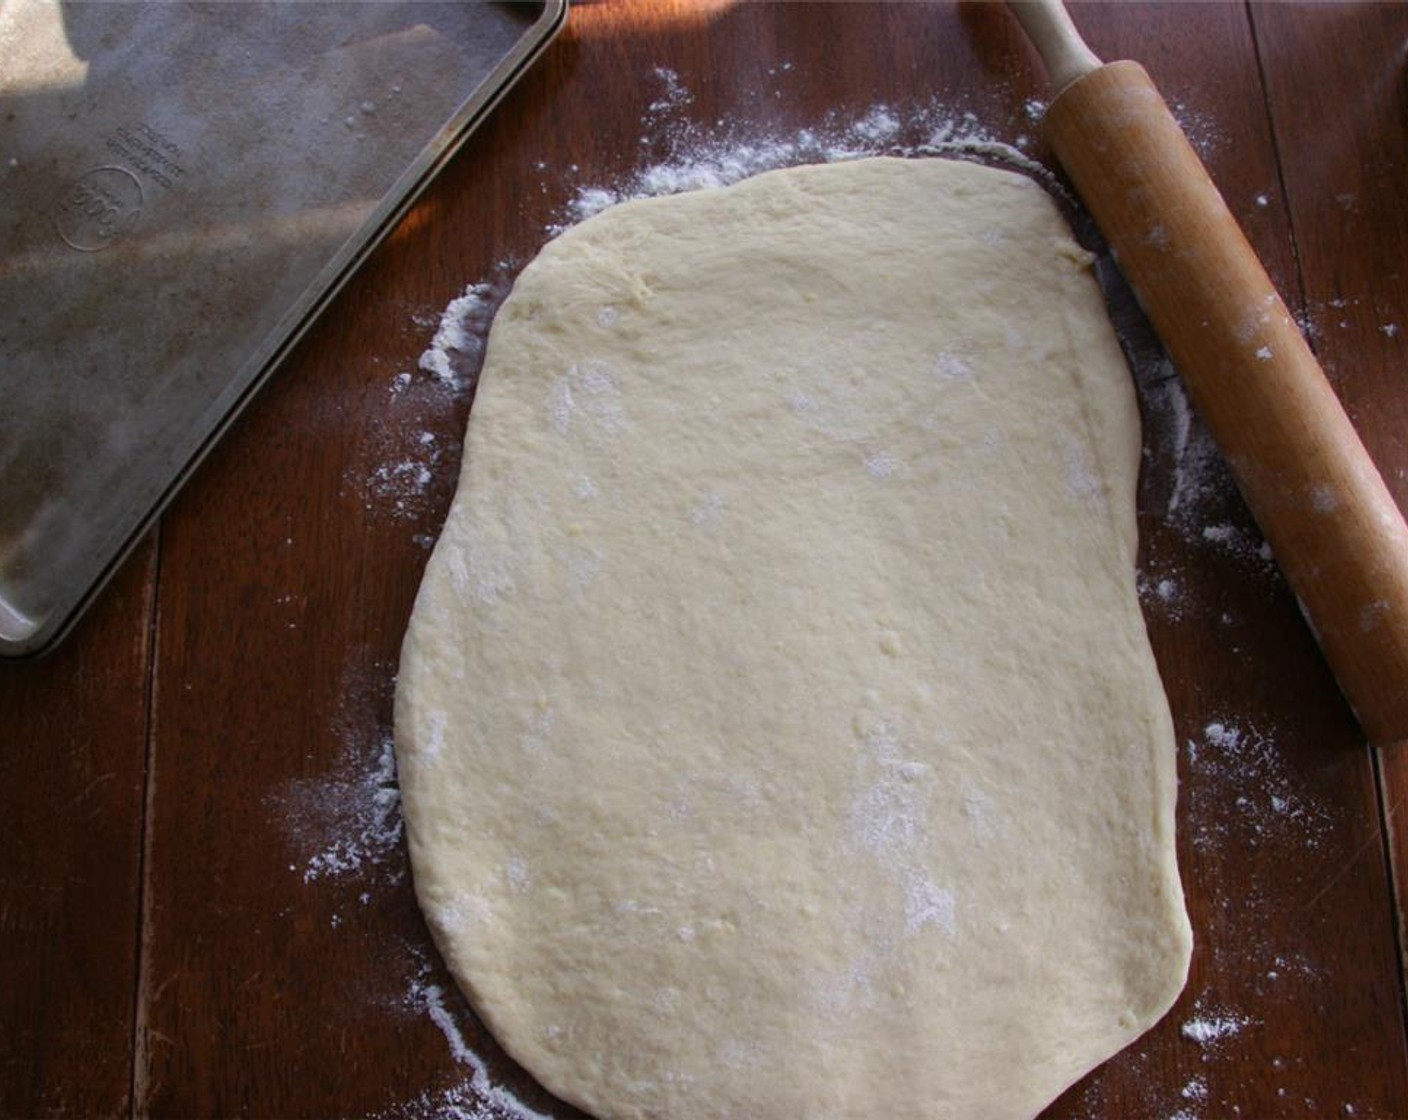 step 7 Grease the bottom and sides of a 9×12-inch baking sheet or jelly roll pan. Return the dough to a work surface and roll or push it out into a rectangle the size of the pan. Place the dough in the pan and push it down to fill the pan. Cover and let rise for 45 minutes.